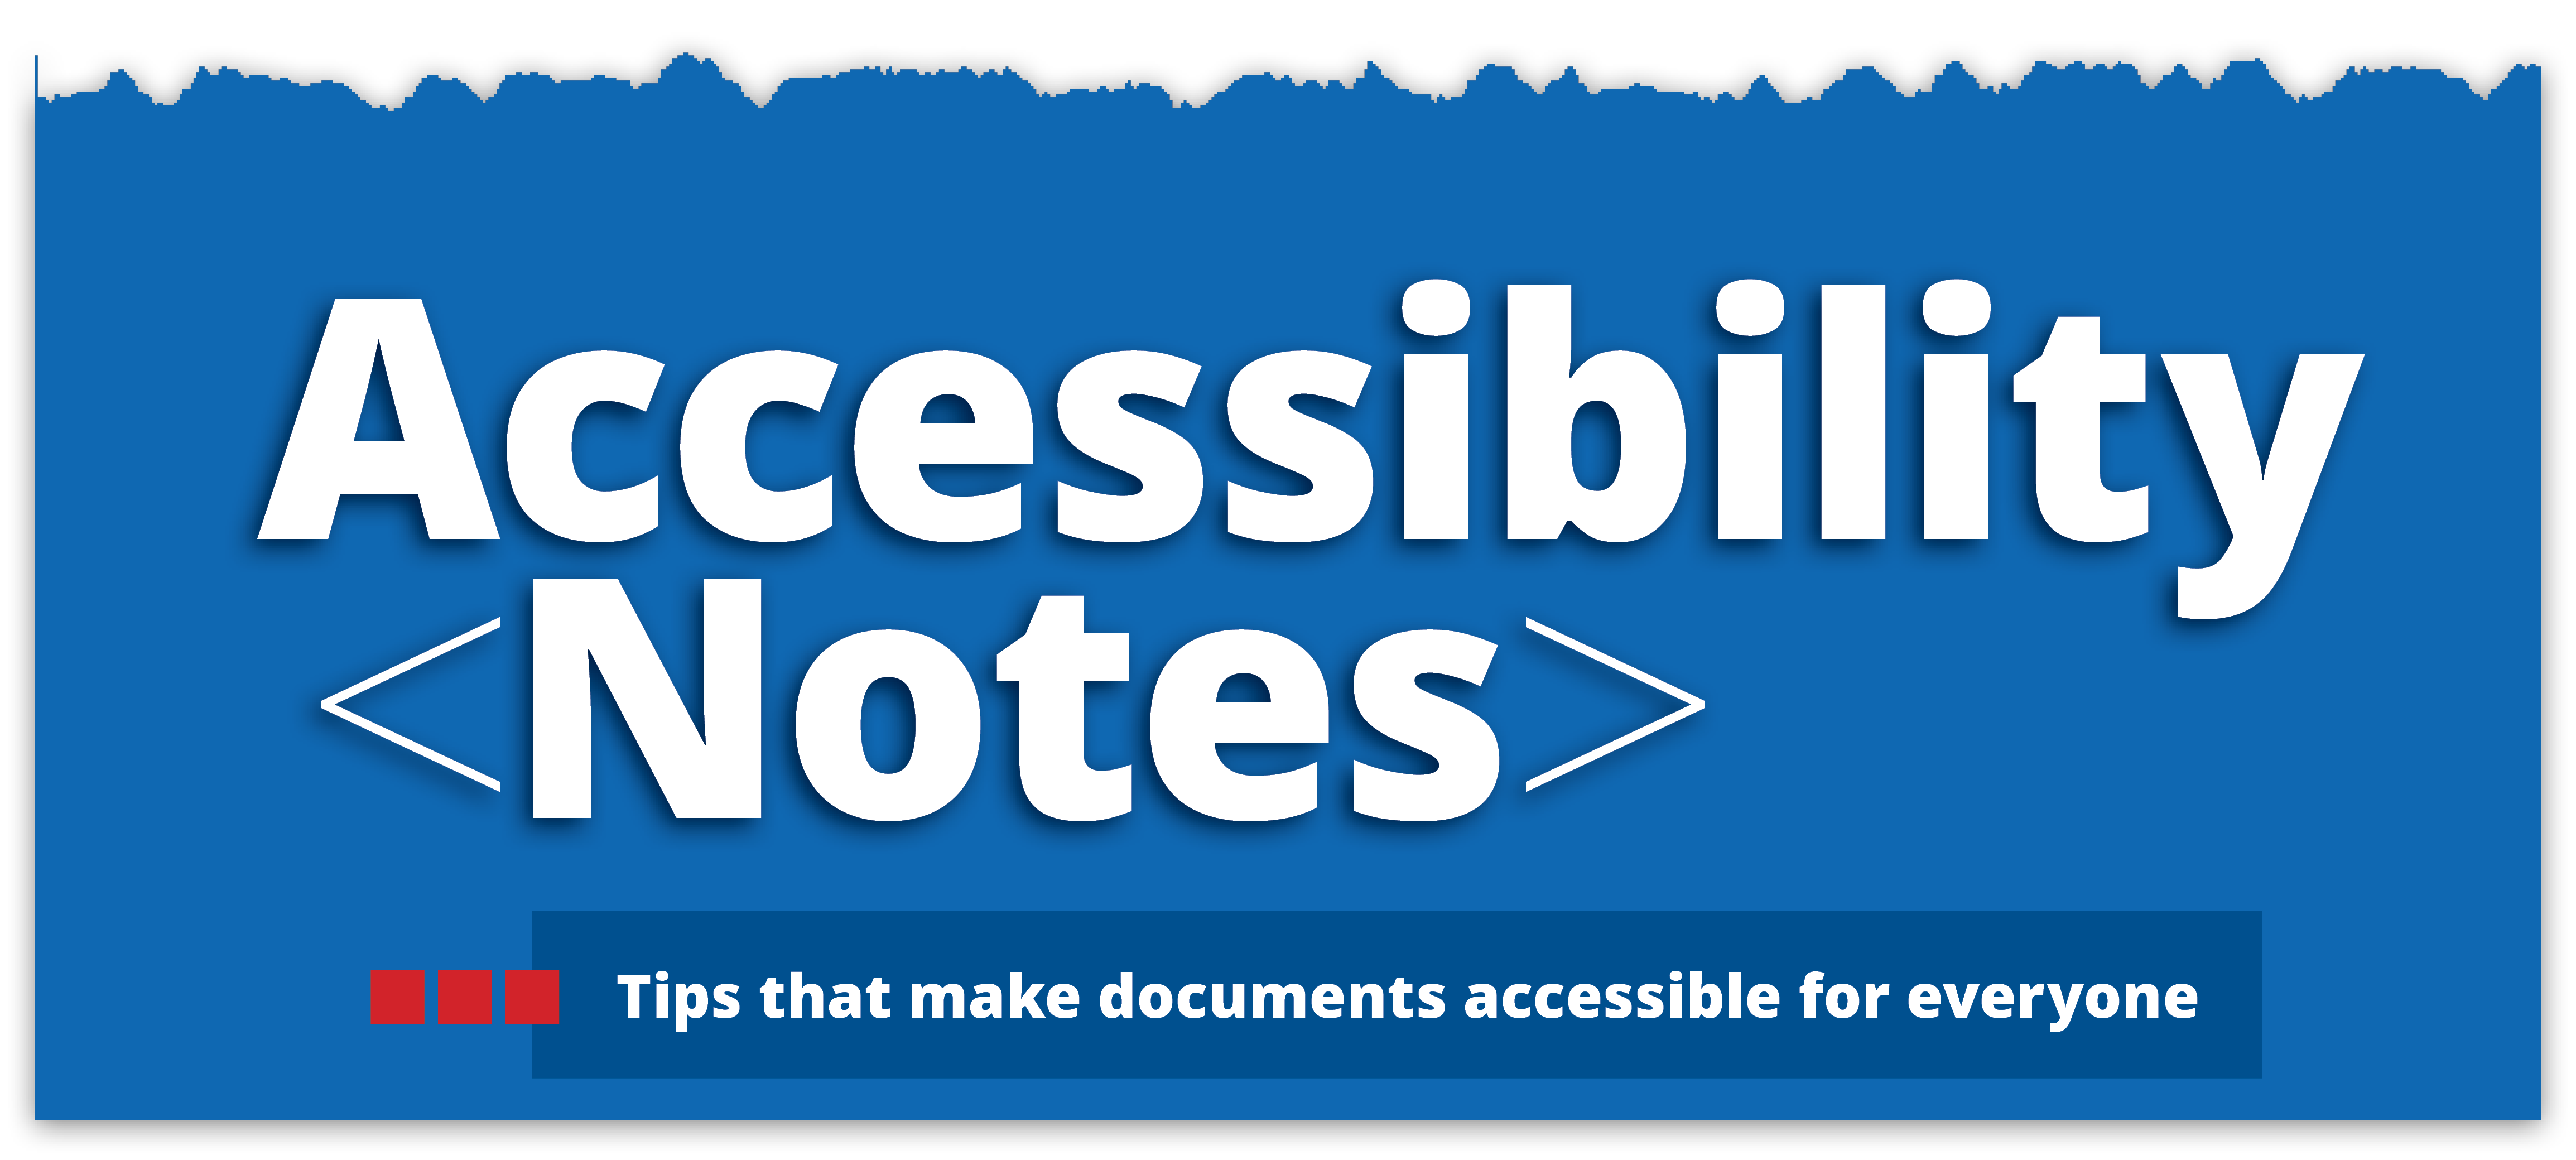 Accessibility Notes: Tips that make documents accessible for everyone.